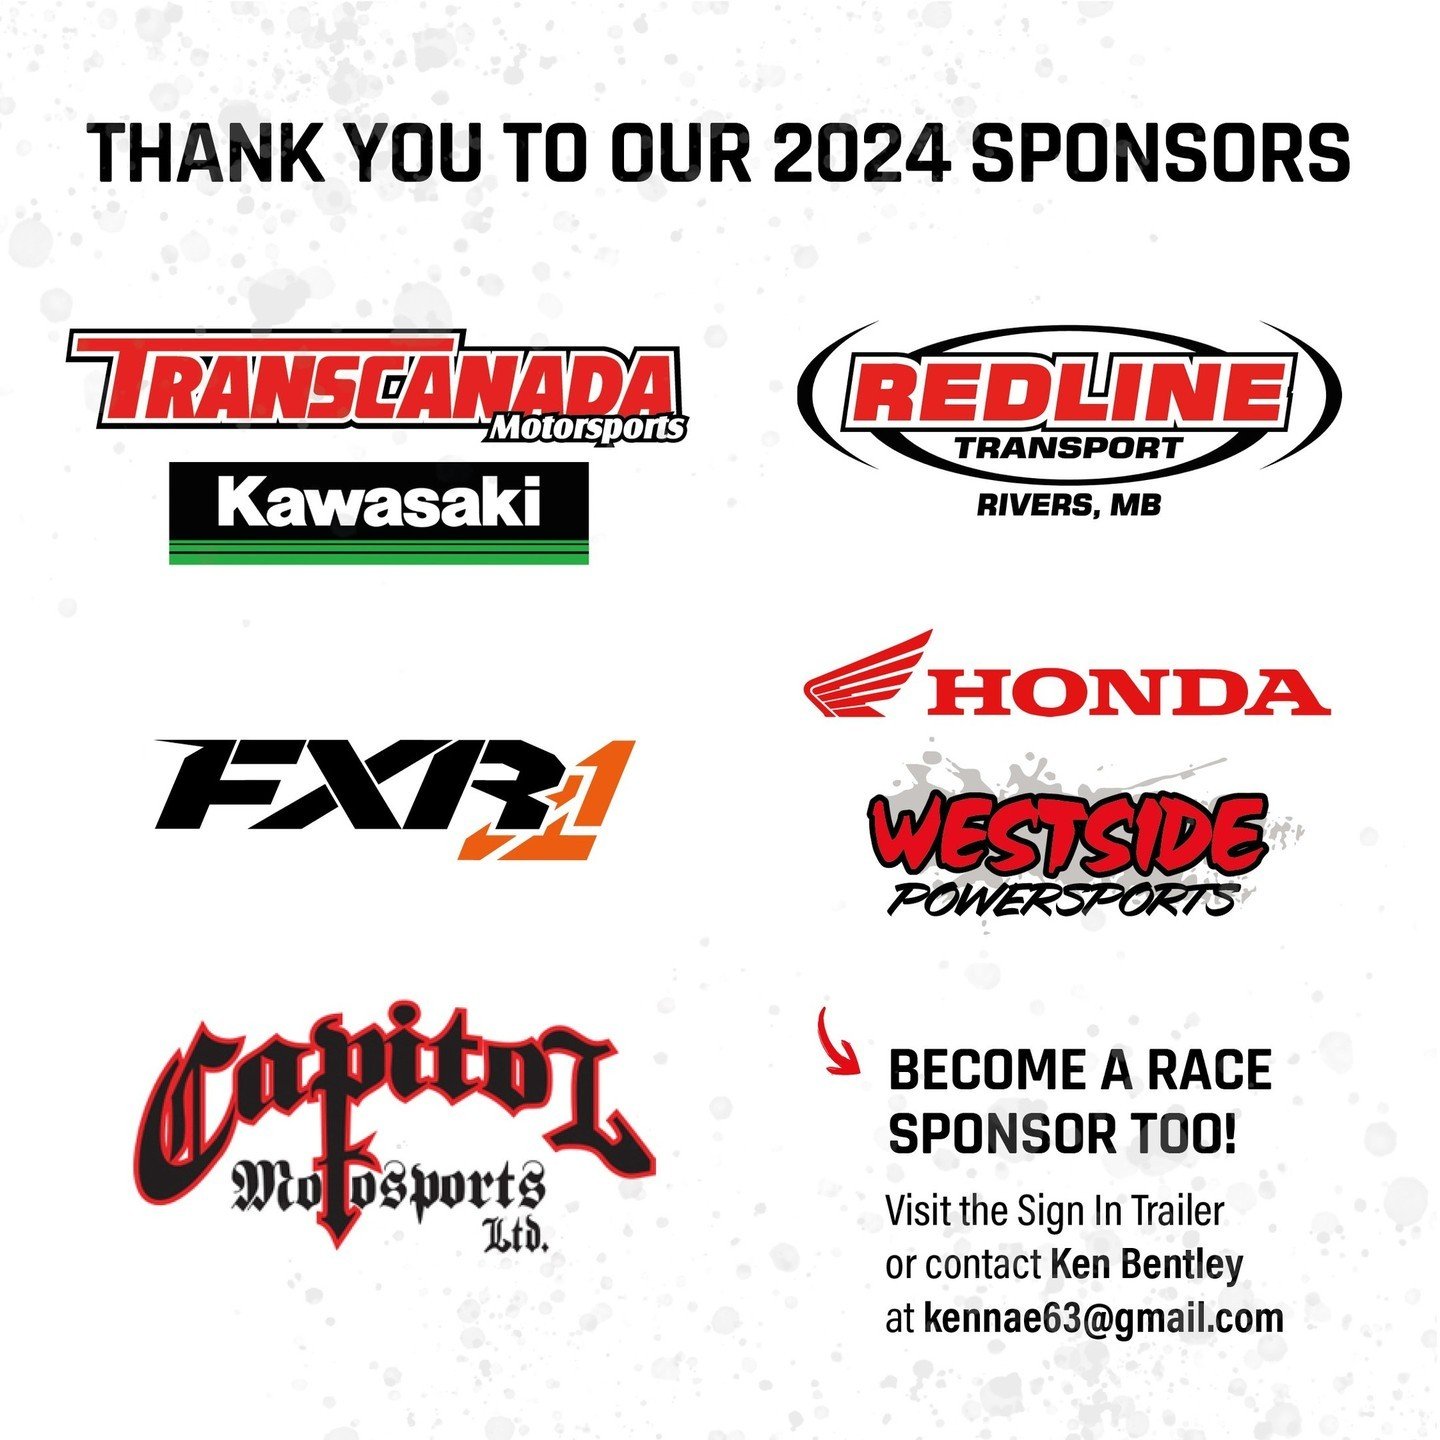 Excited to have @transcanadamotorsport , RedLine Transport, @canadakawasaki @fxrfactoryoutletsuperstore @westsidepowersports @hondacanada and @capitolmotosports as our sponsors for 2024! ⁠
⁠
Interested in becoming a race sponsor too? Contact Ken Bent